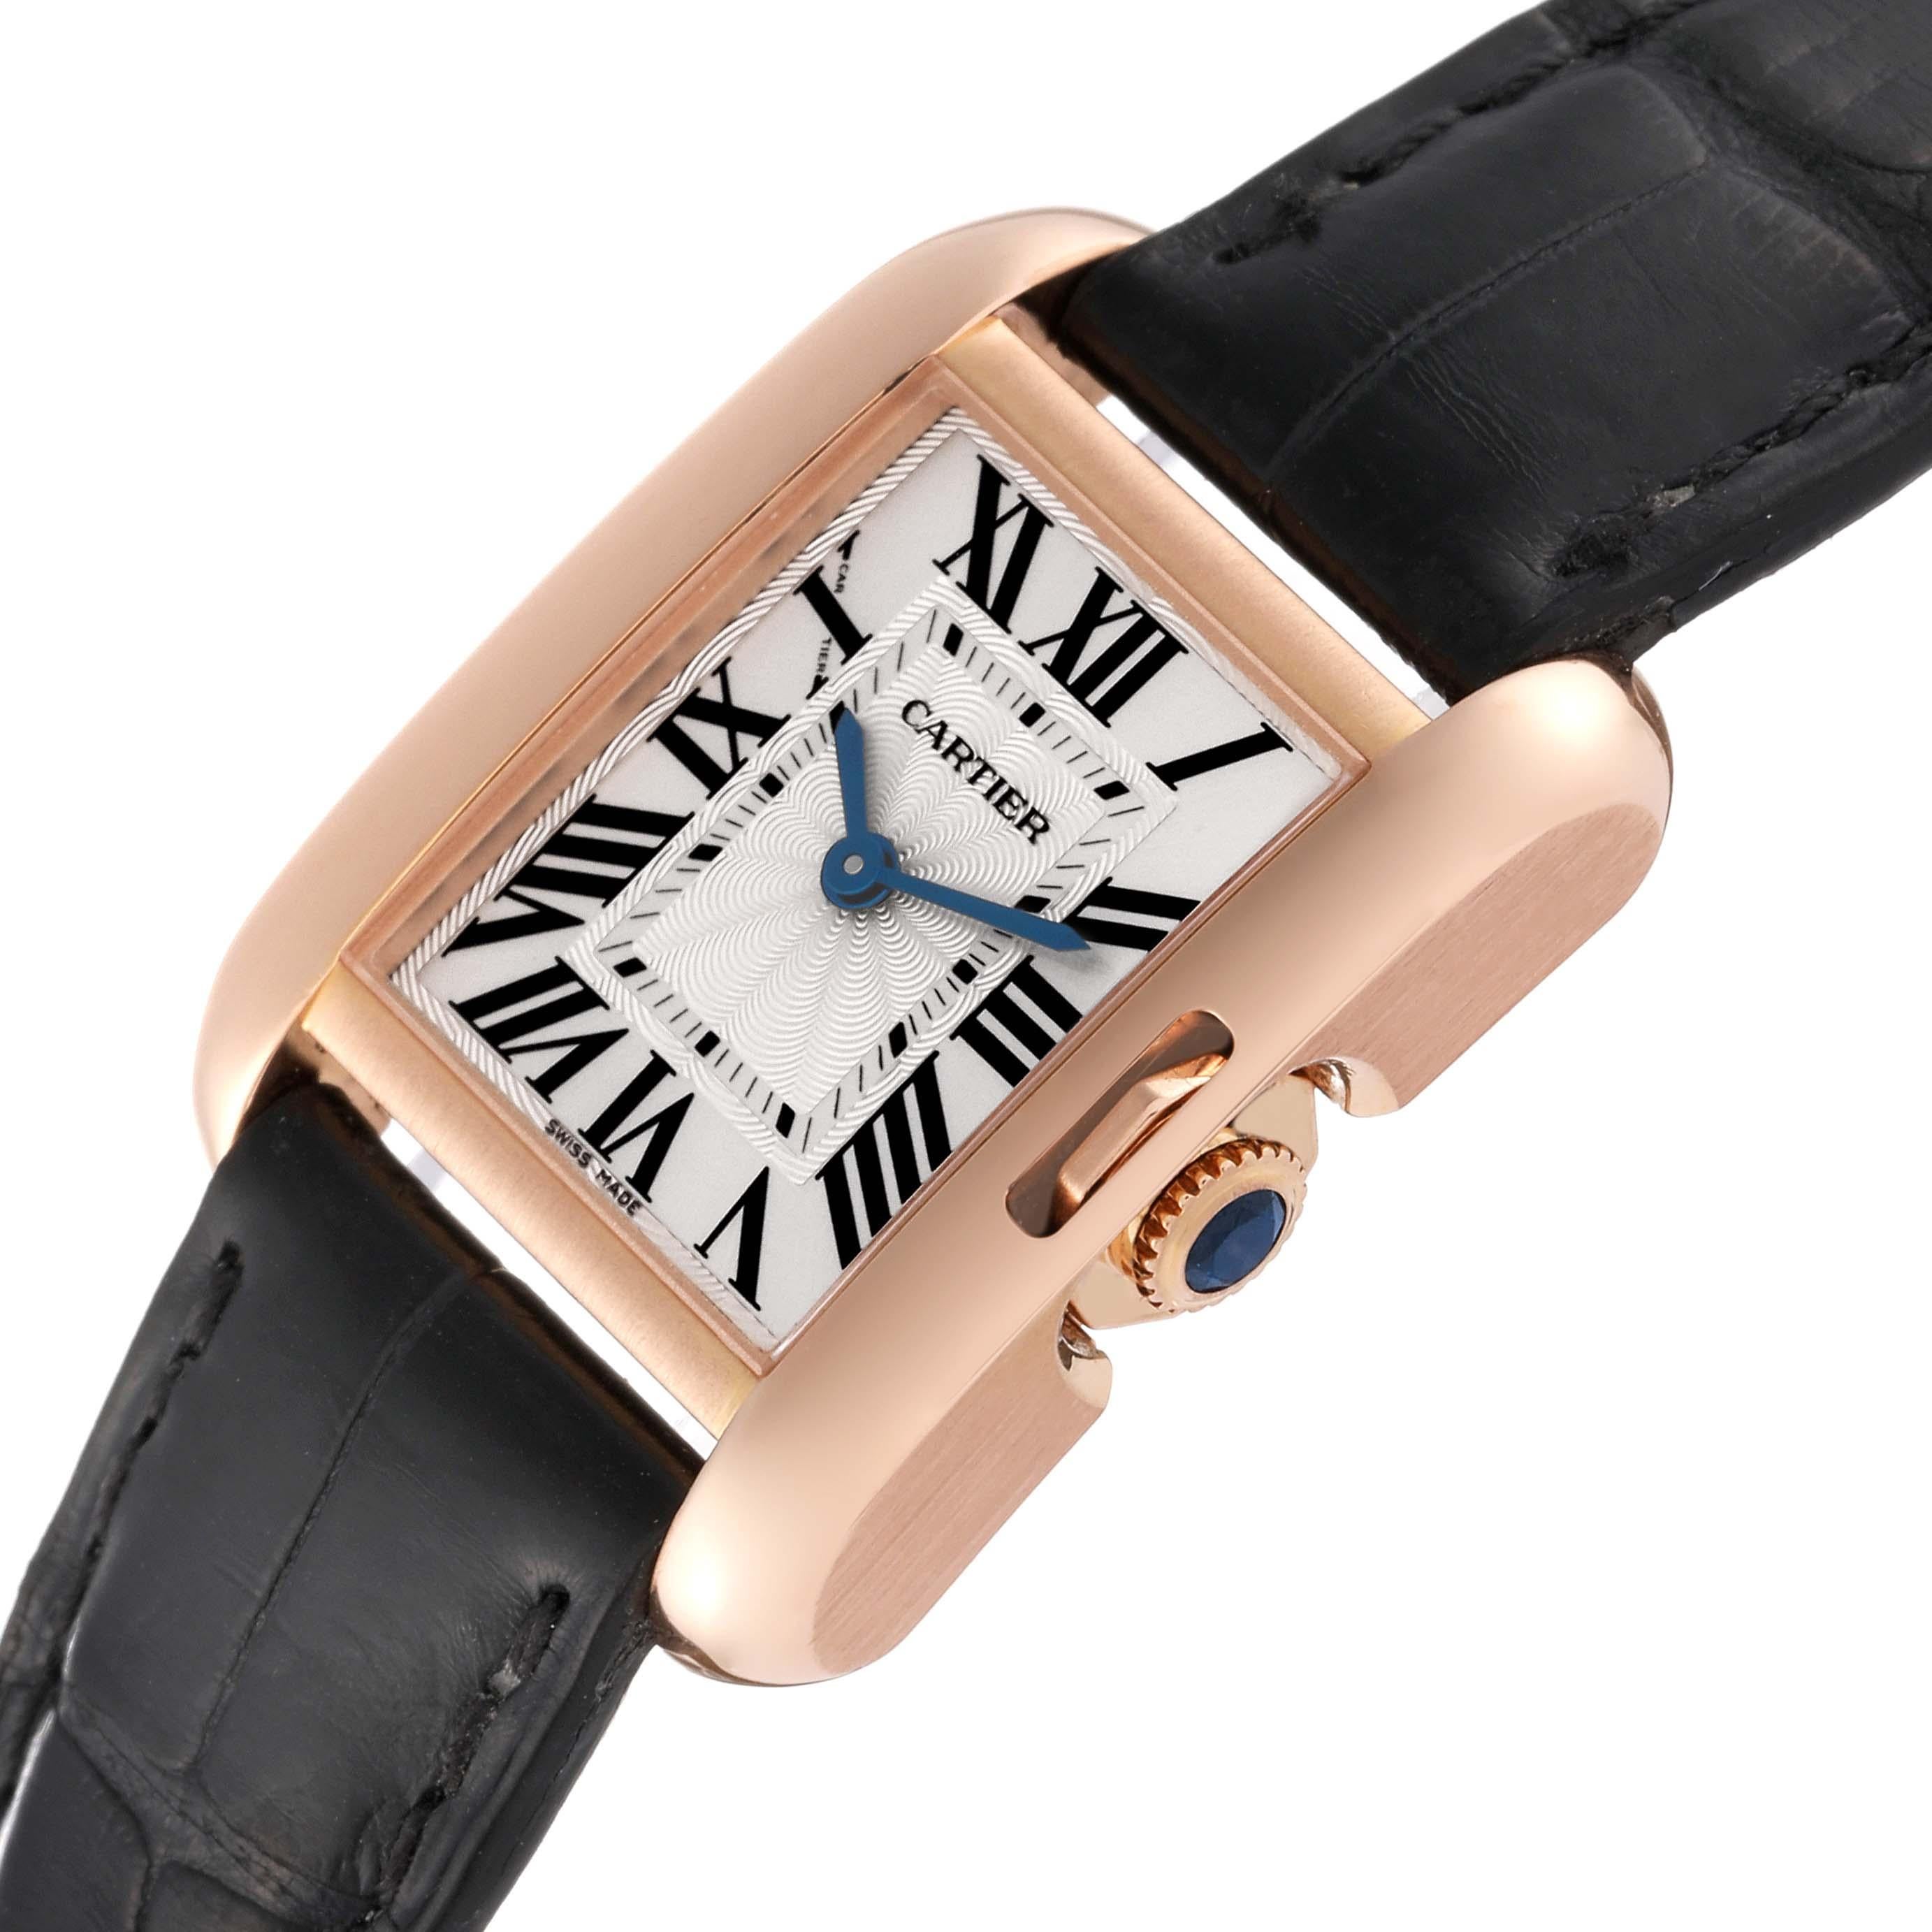 Cartier Tank Anglaise Rose Gold Small Ladies Watch W5310027 1